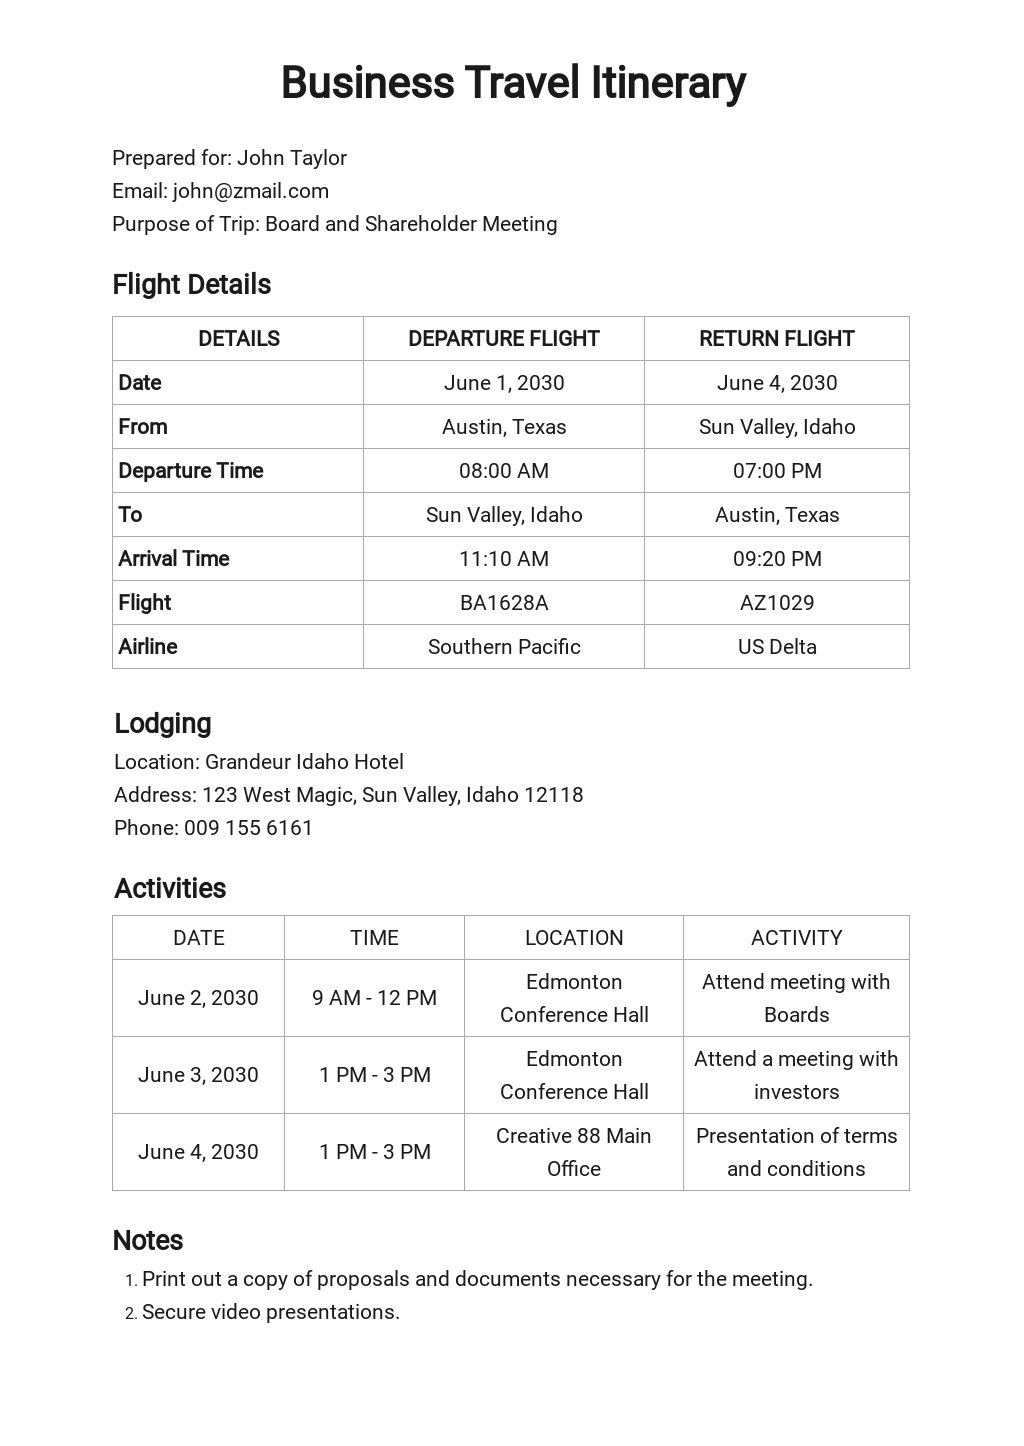 FREE Business Travel Itinerary with Meeting Schedule Template in Google